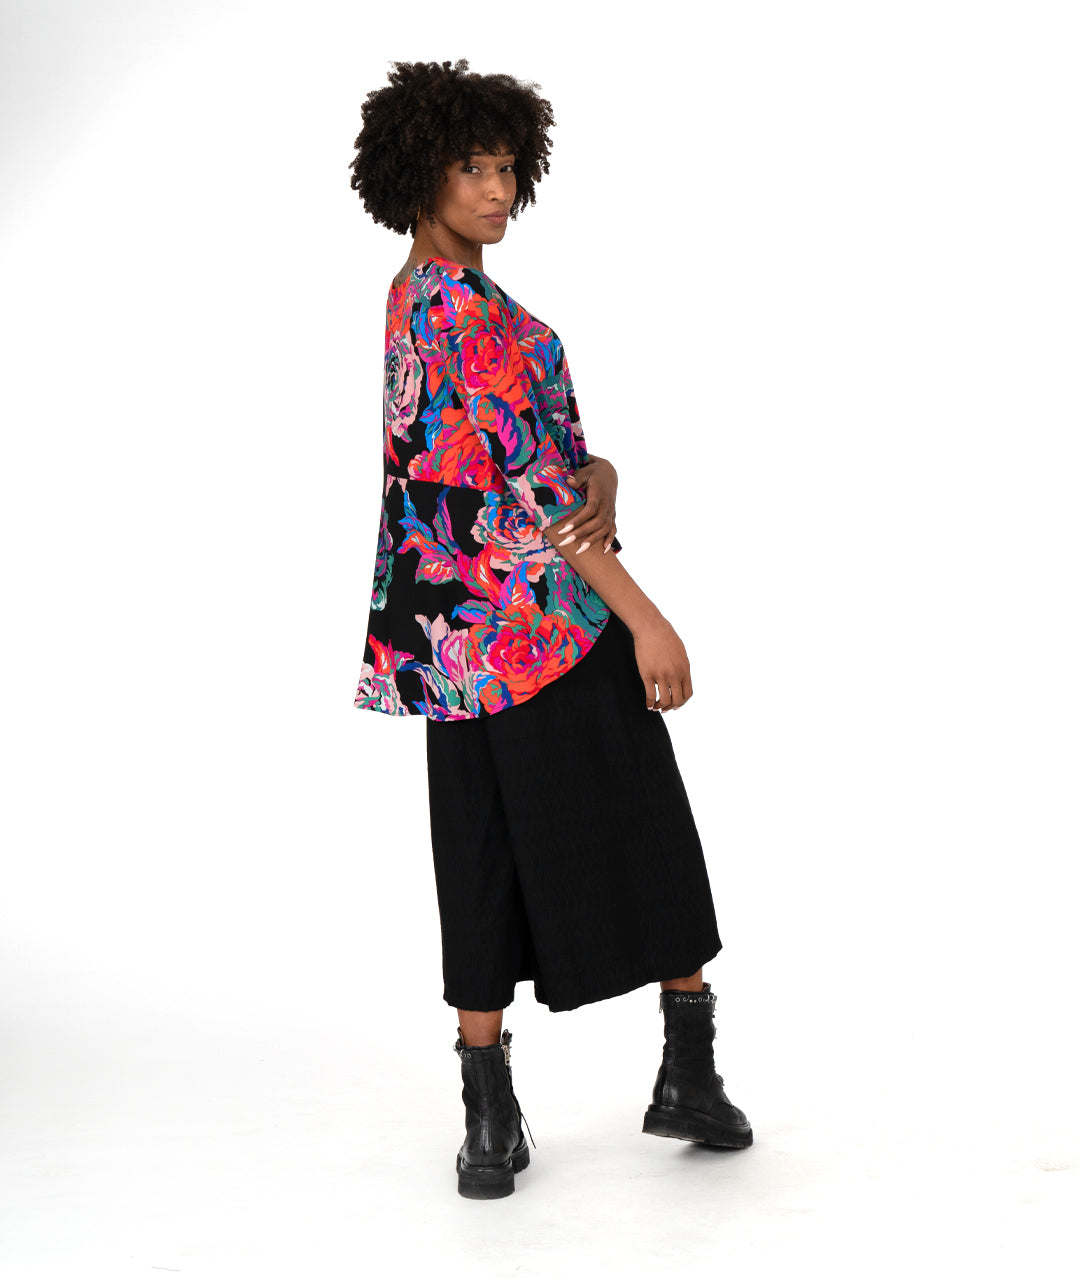 model in a straight leg black pant with a floral print blouse in a high low hem